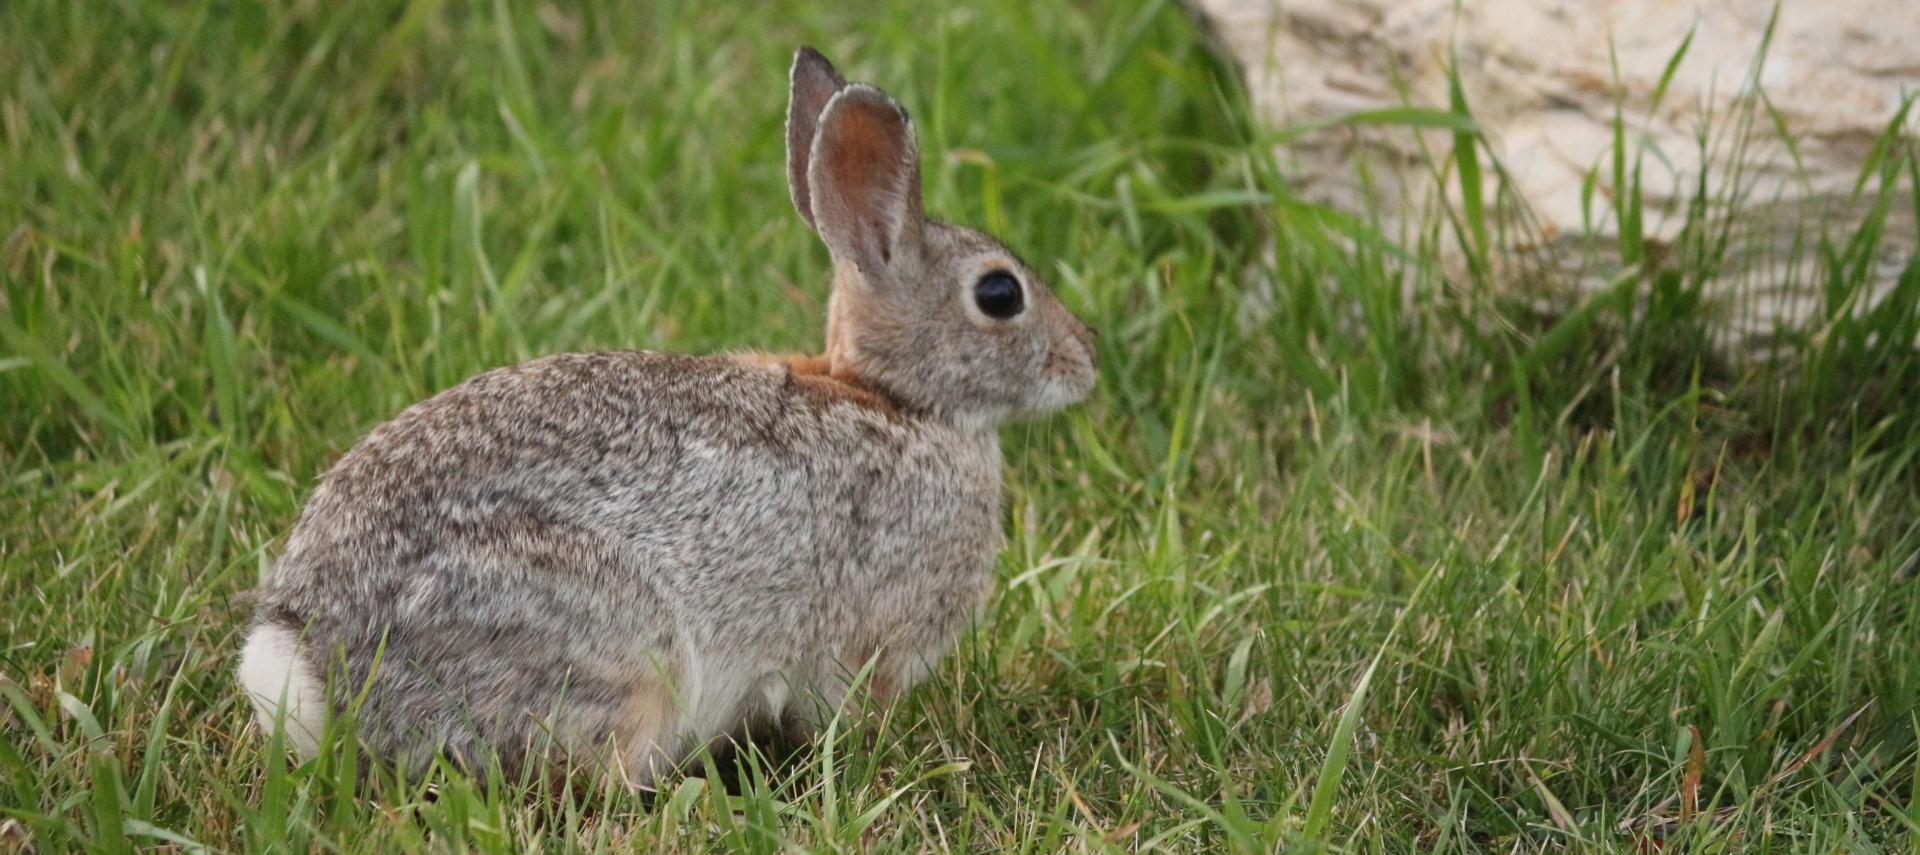 cotton-tail rabbit in the grass